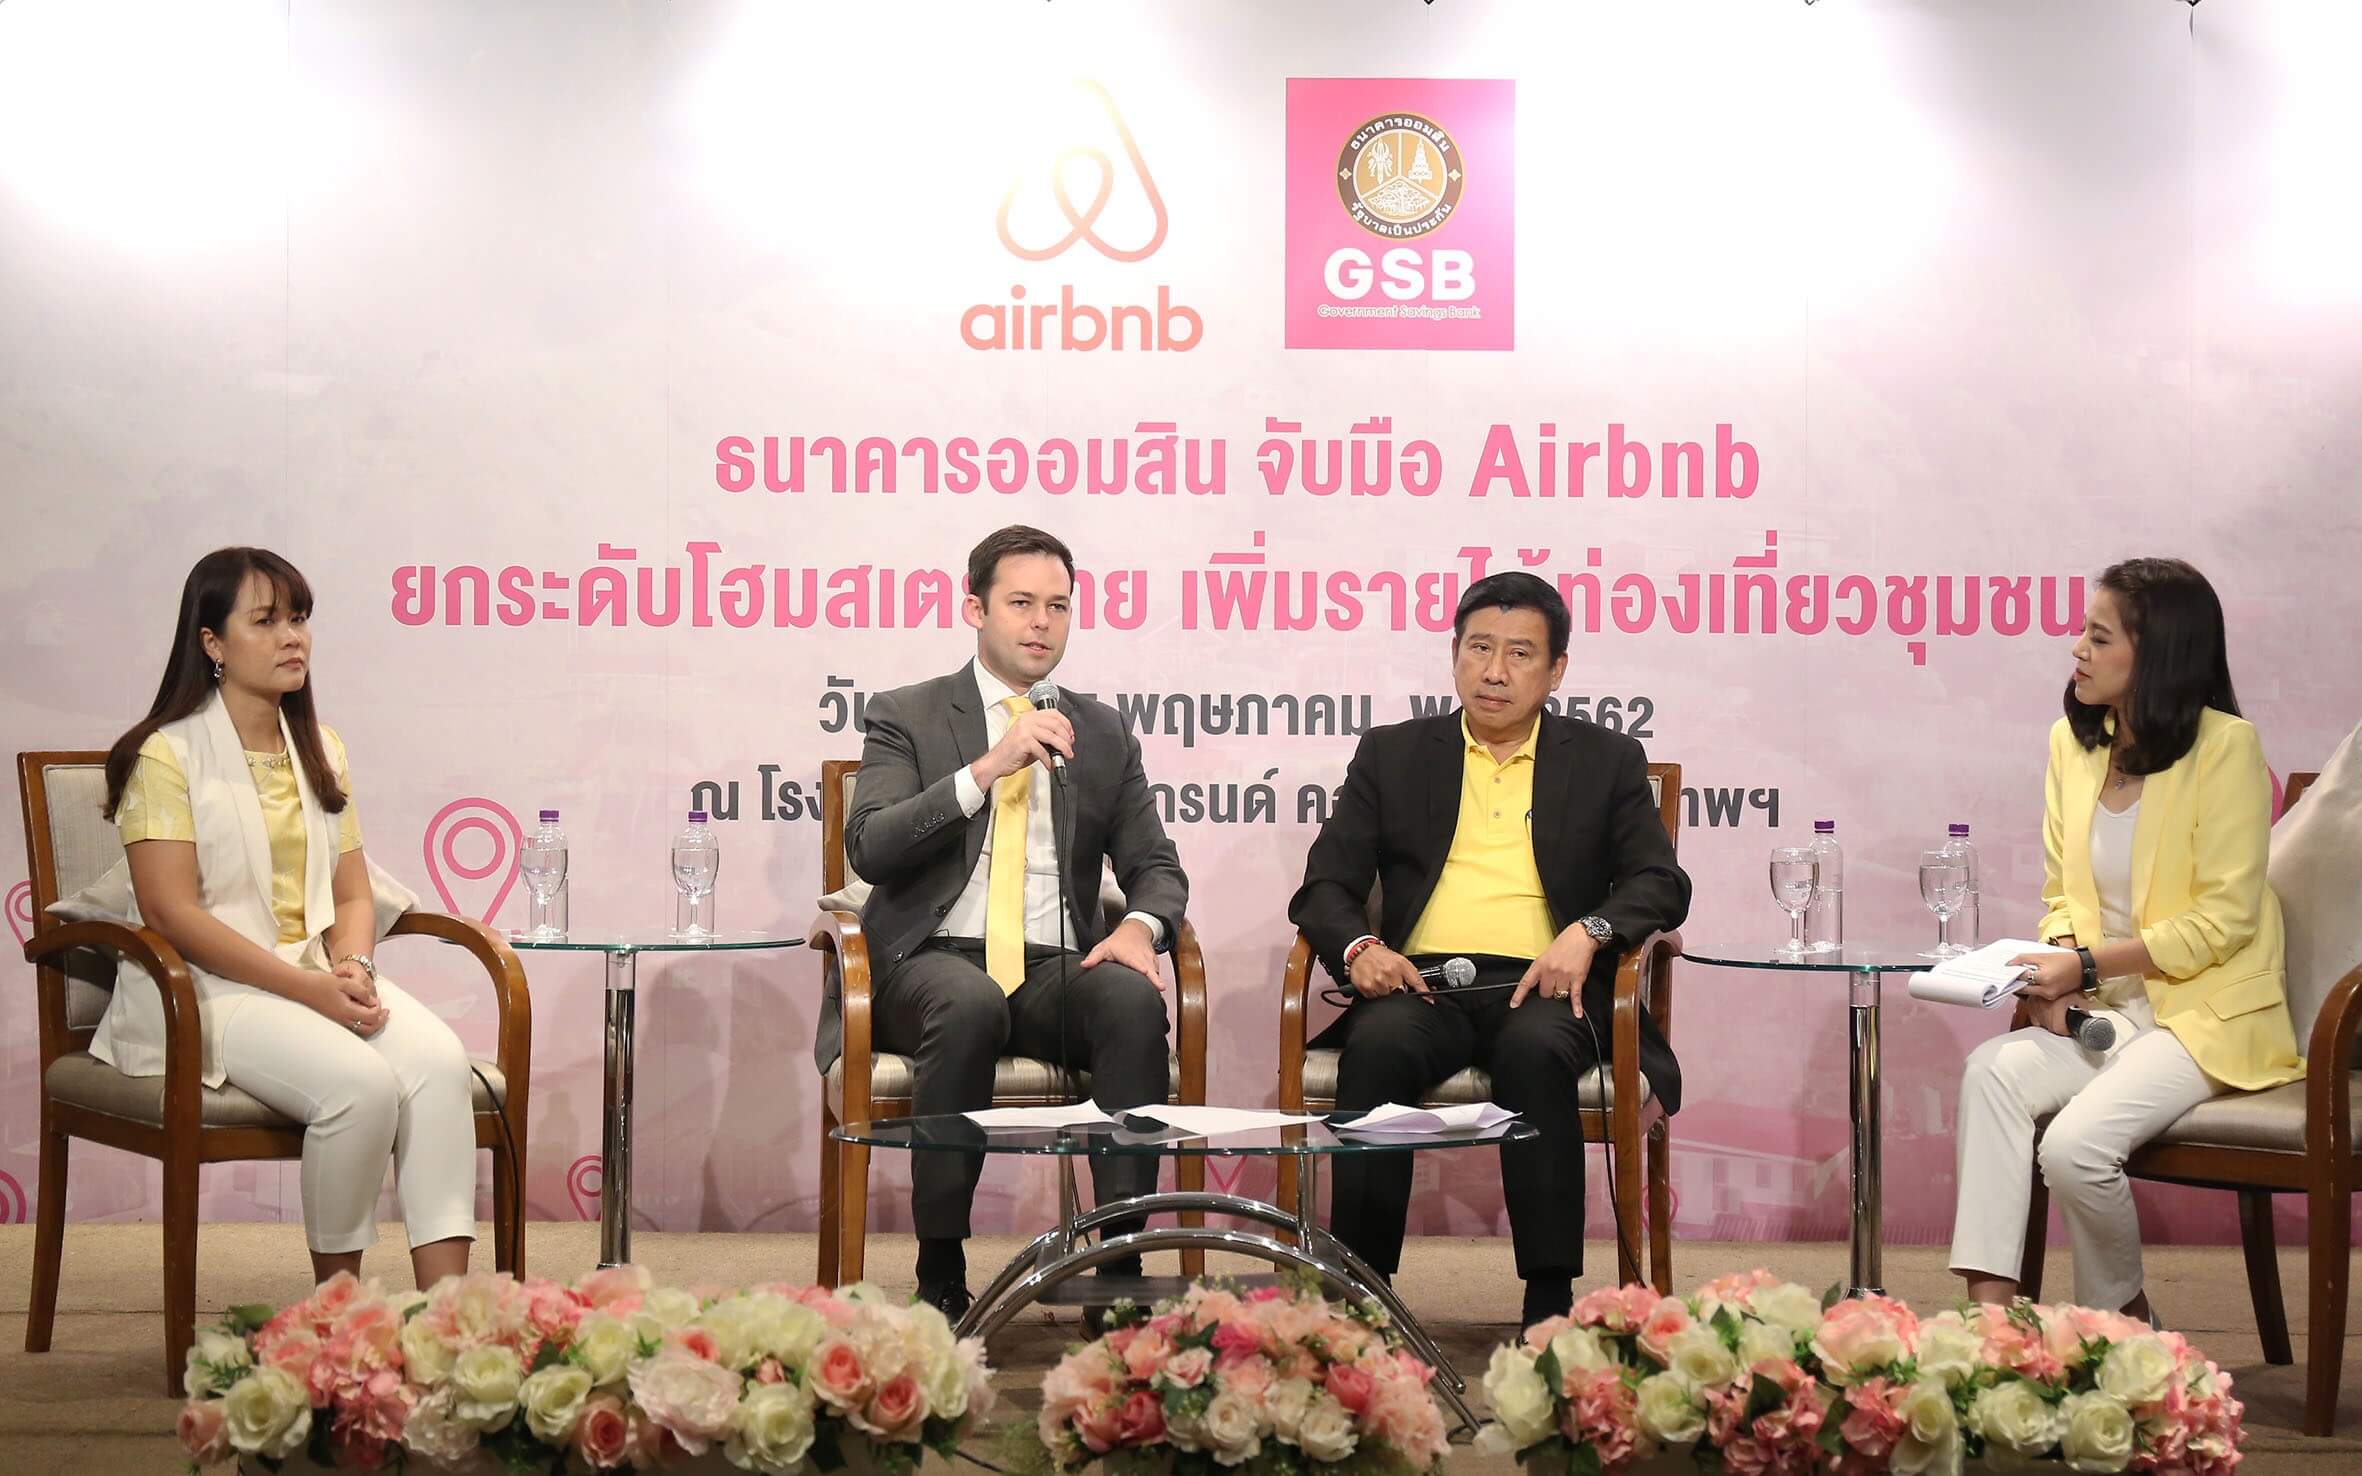 Dr.-Chatchai-Payuhanaveechai-GSB-President-and-CEO-and-Mike-Orgill-Airbnb-General-Manager-for-Southeast-Asia-Hong-Kong-and-Taiwan-jointly-launched-the-partnership